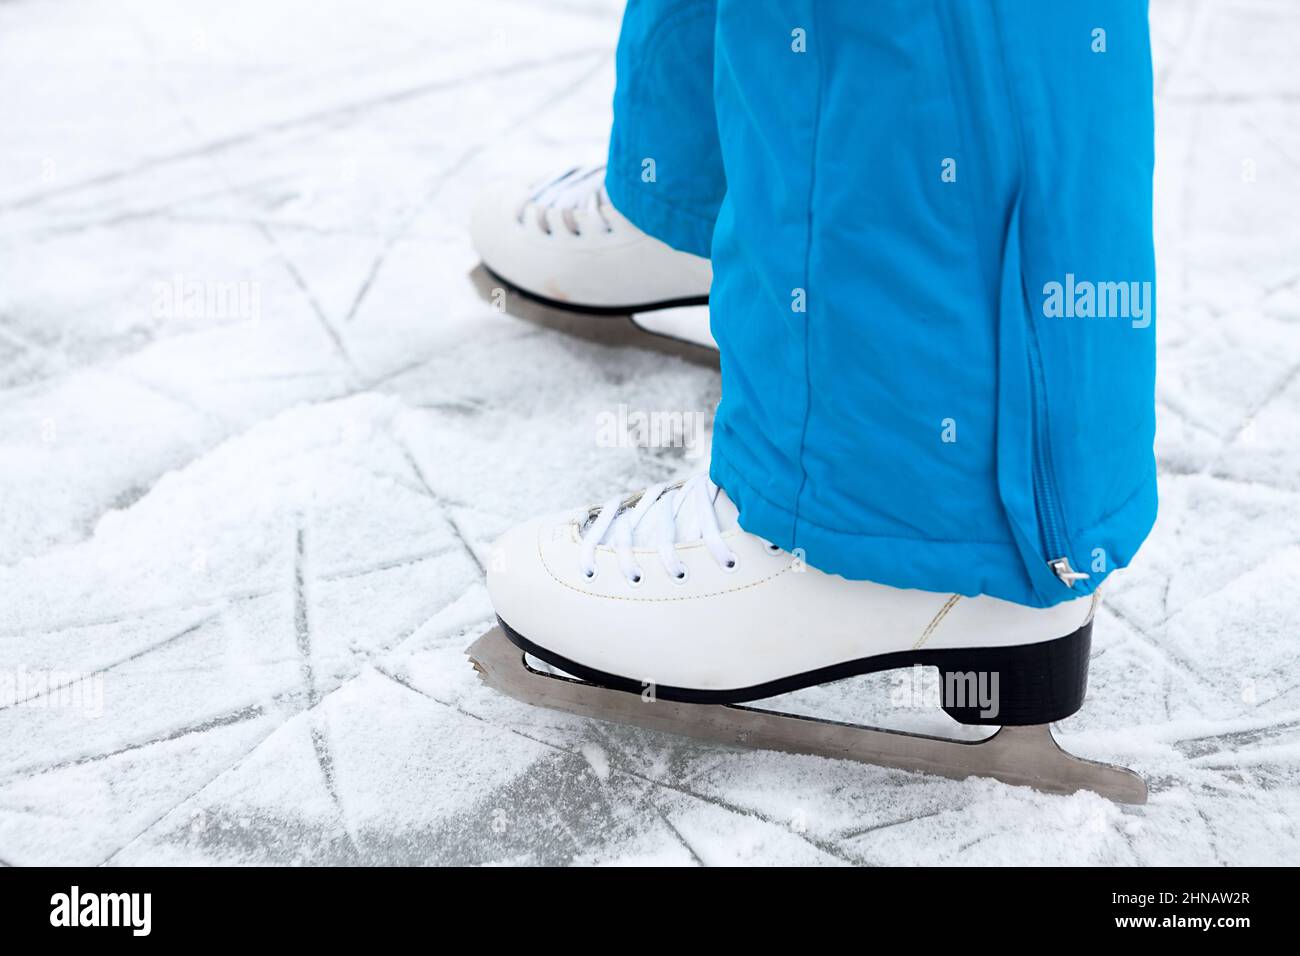 Female legs are in figure skates on a lake ice, close up view Stock Photo